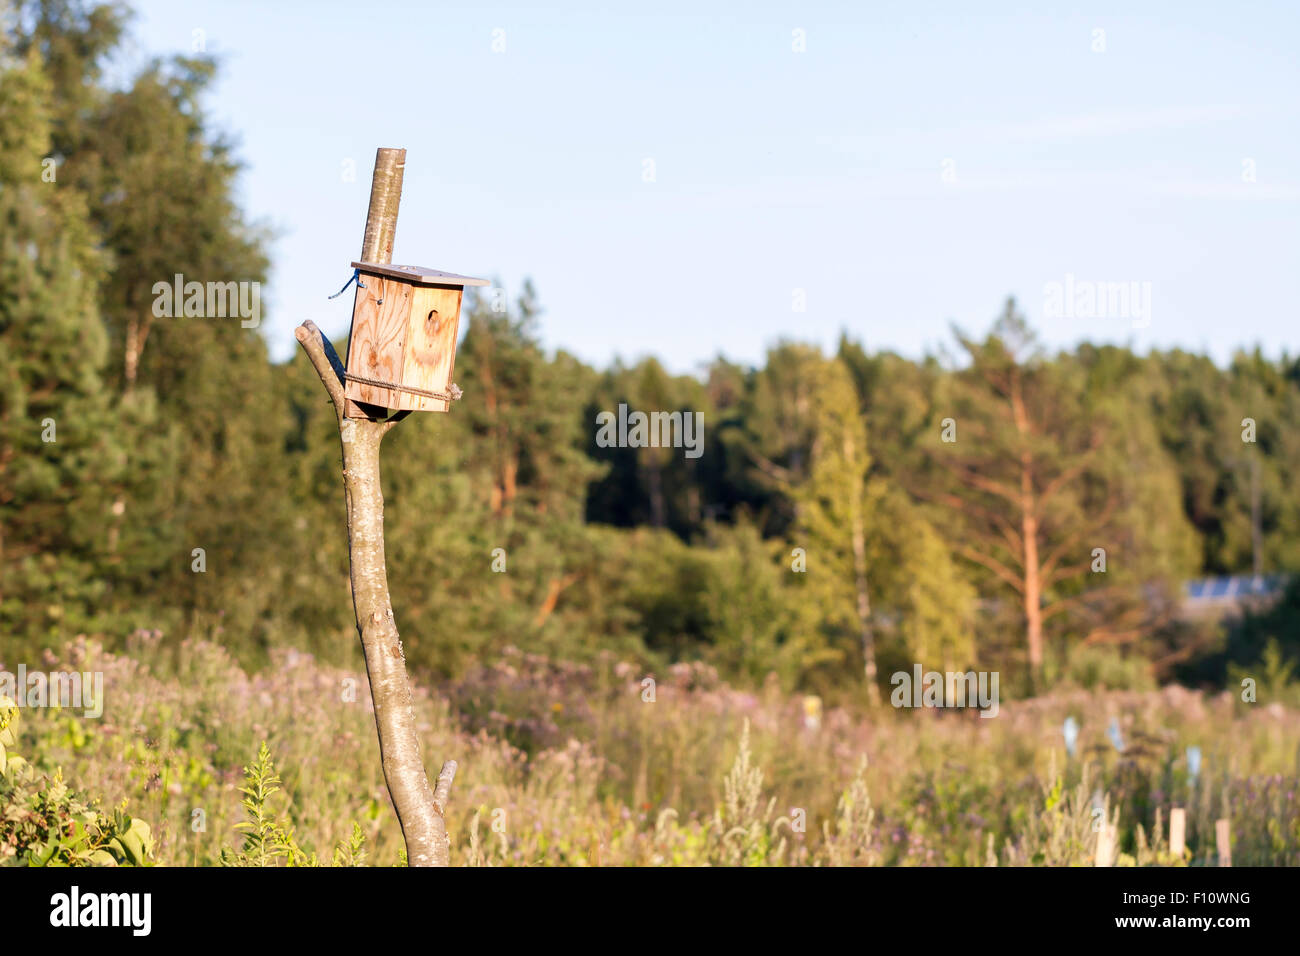 Man made wooden birdhouse at sunset attached to a branch Stock Photo